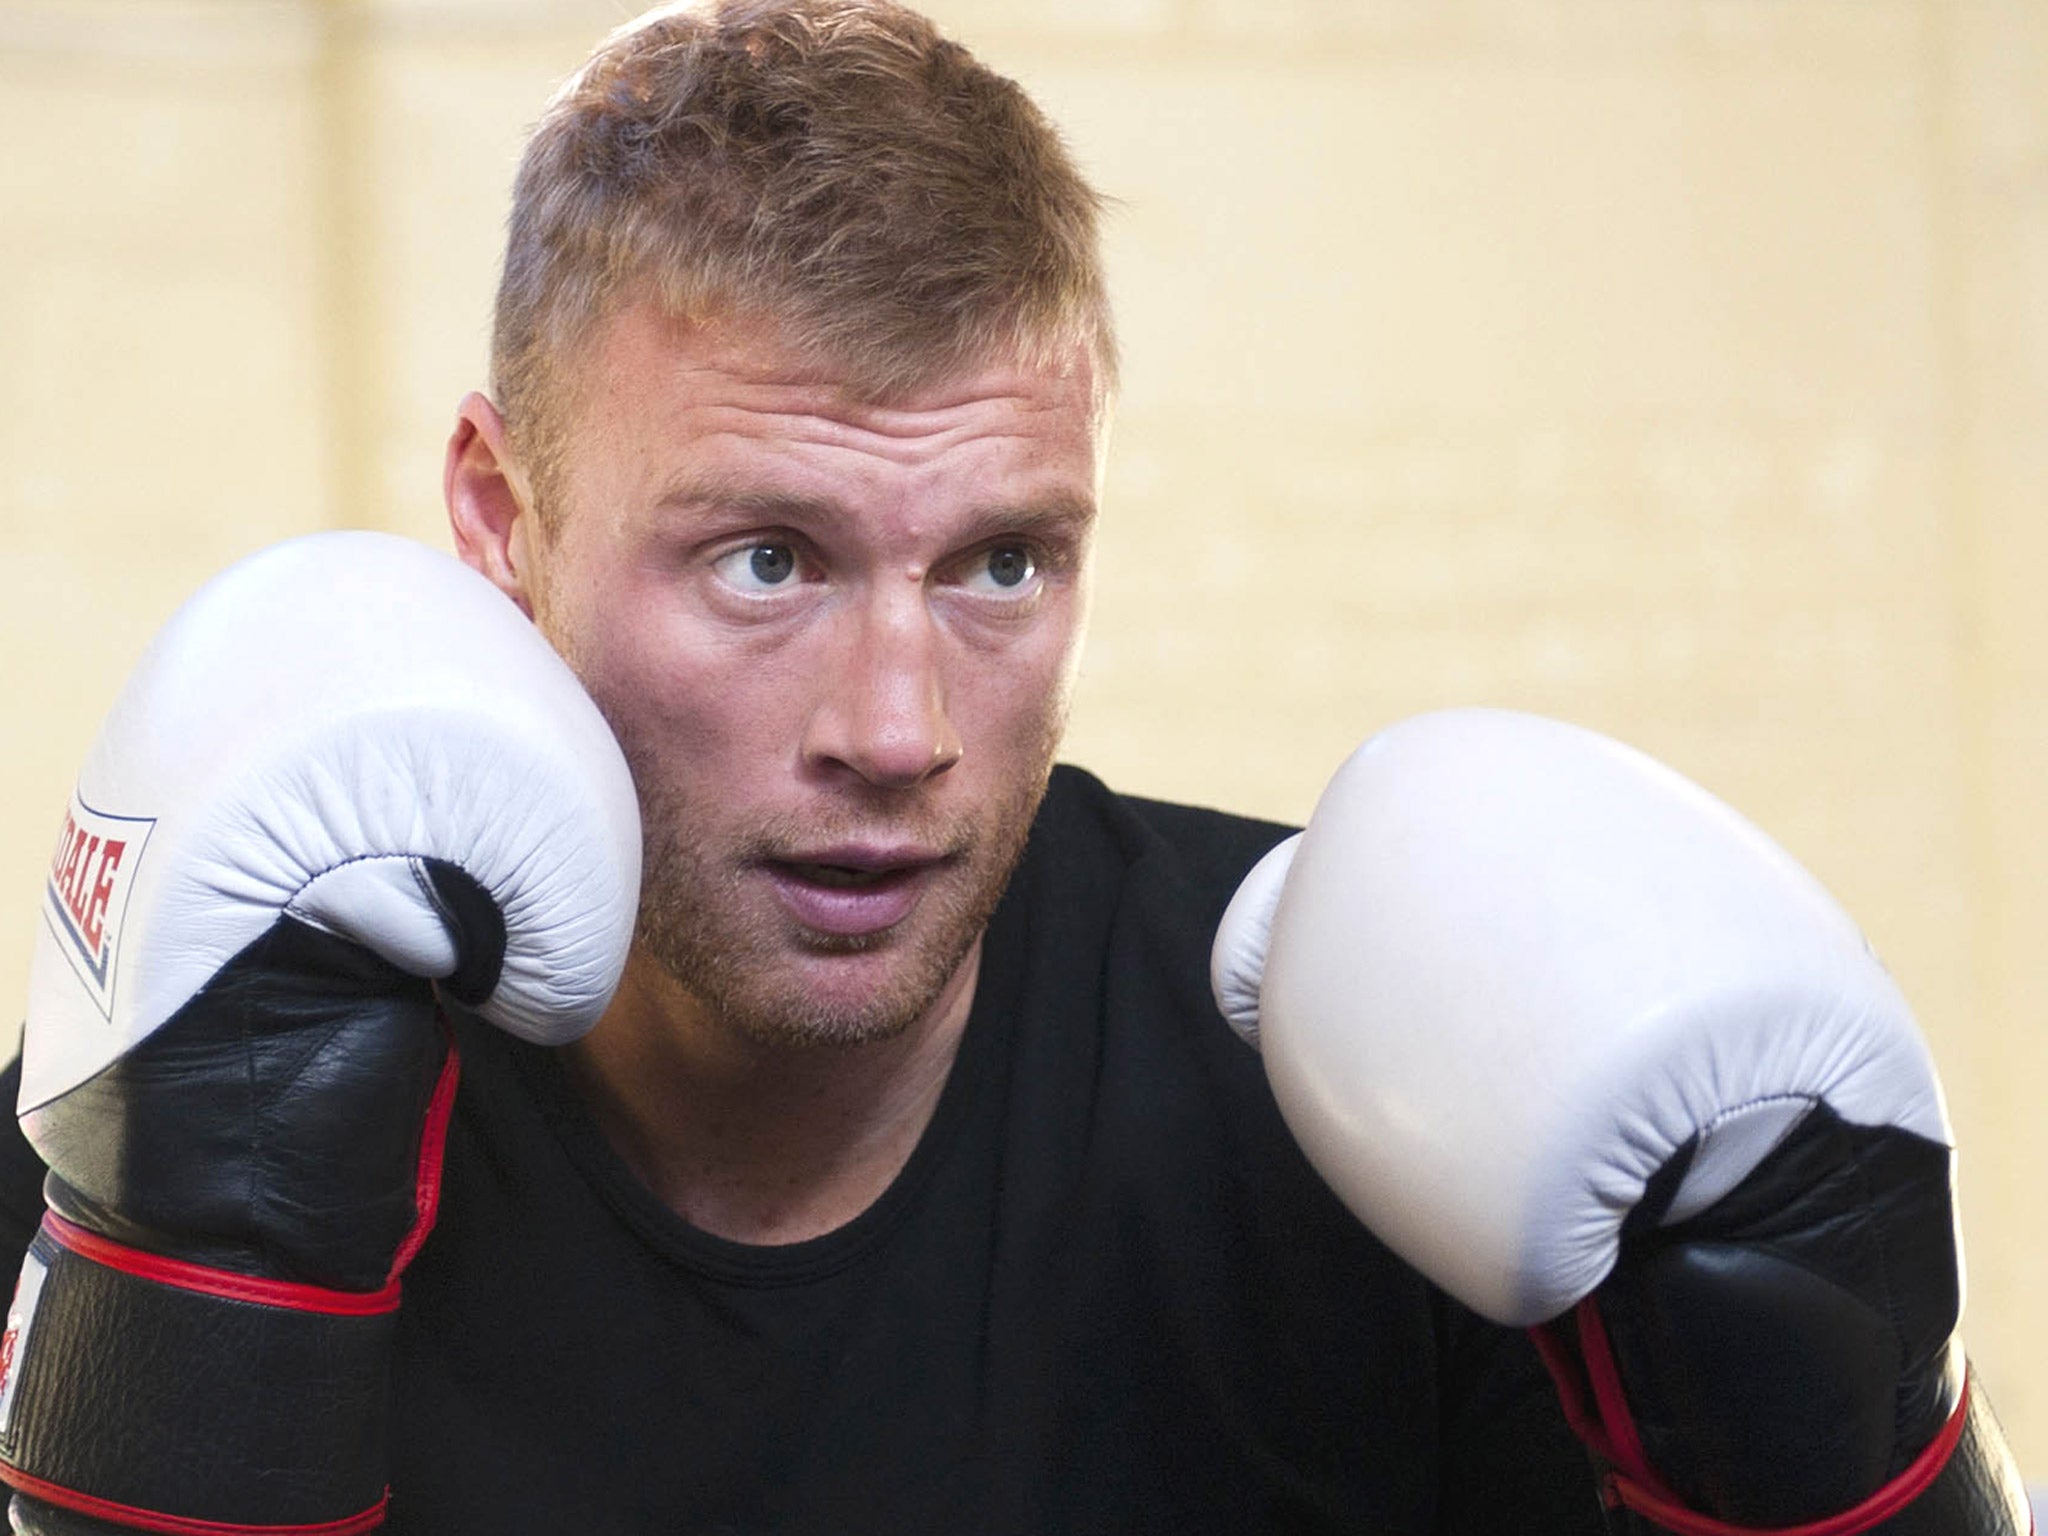 Freddie Flintoff makes his boxing debut on Friday